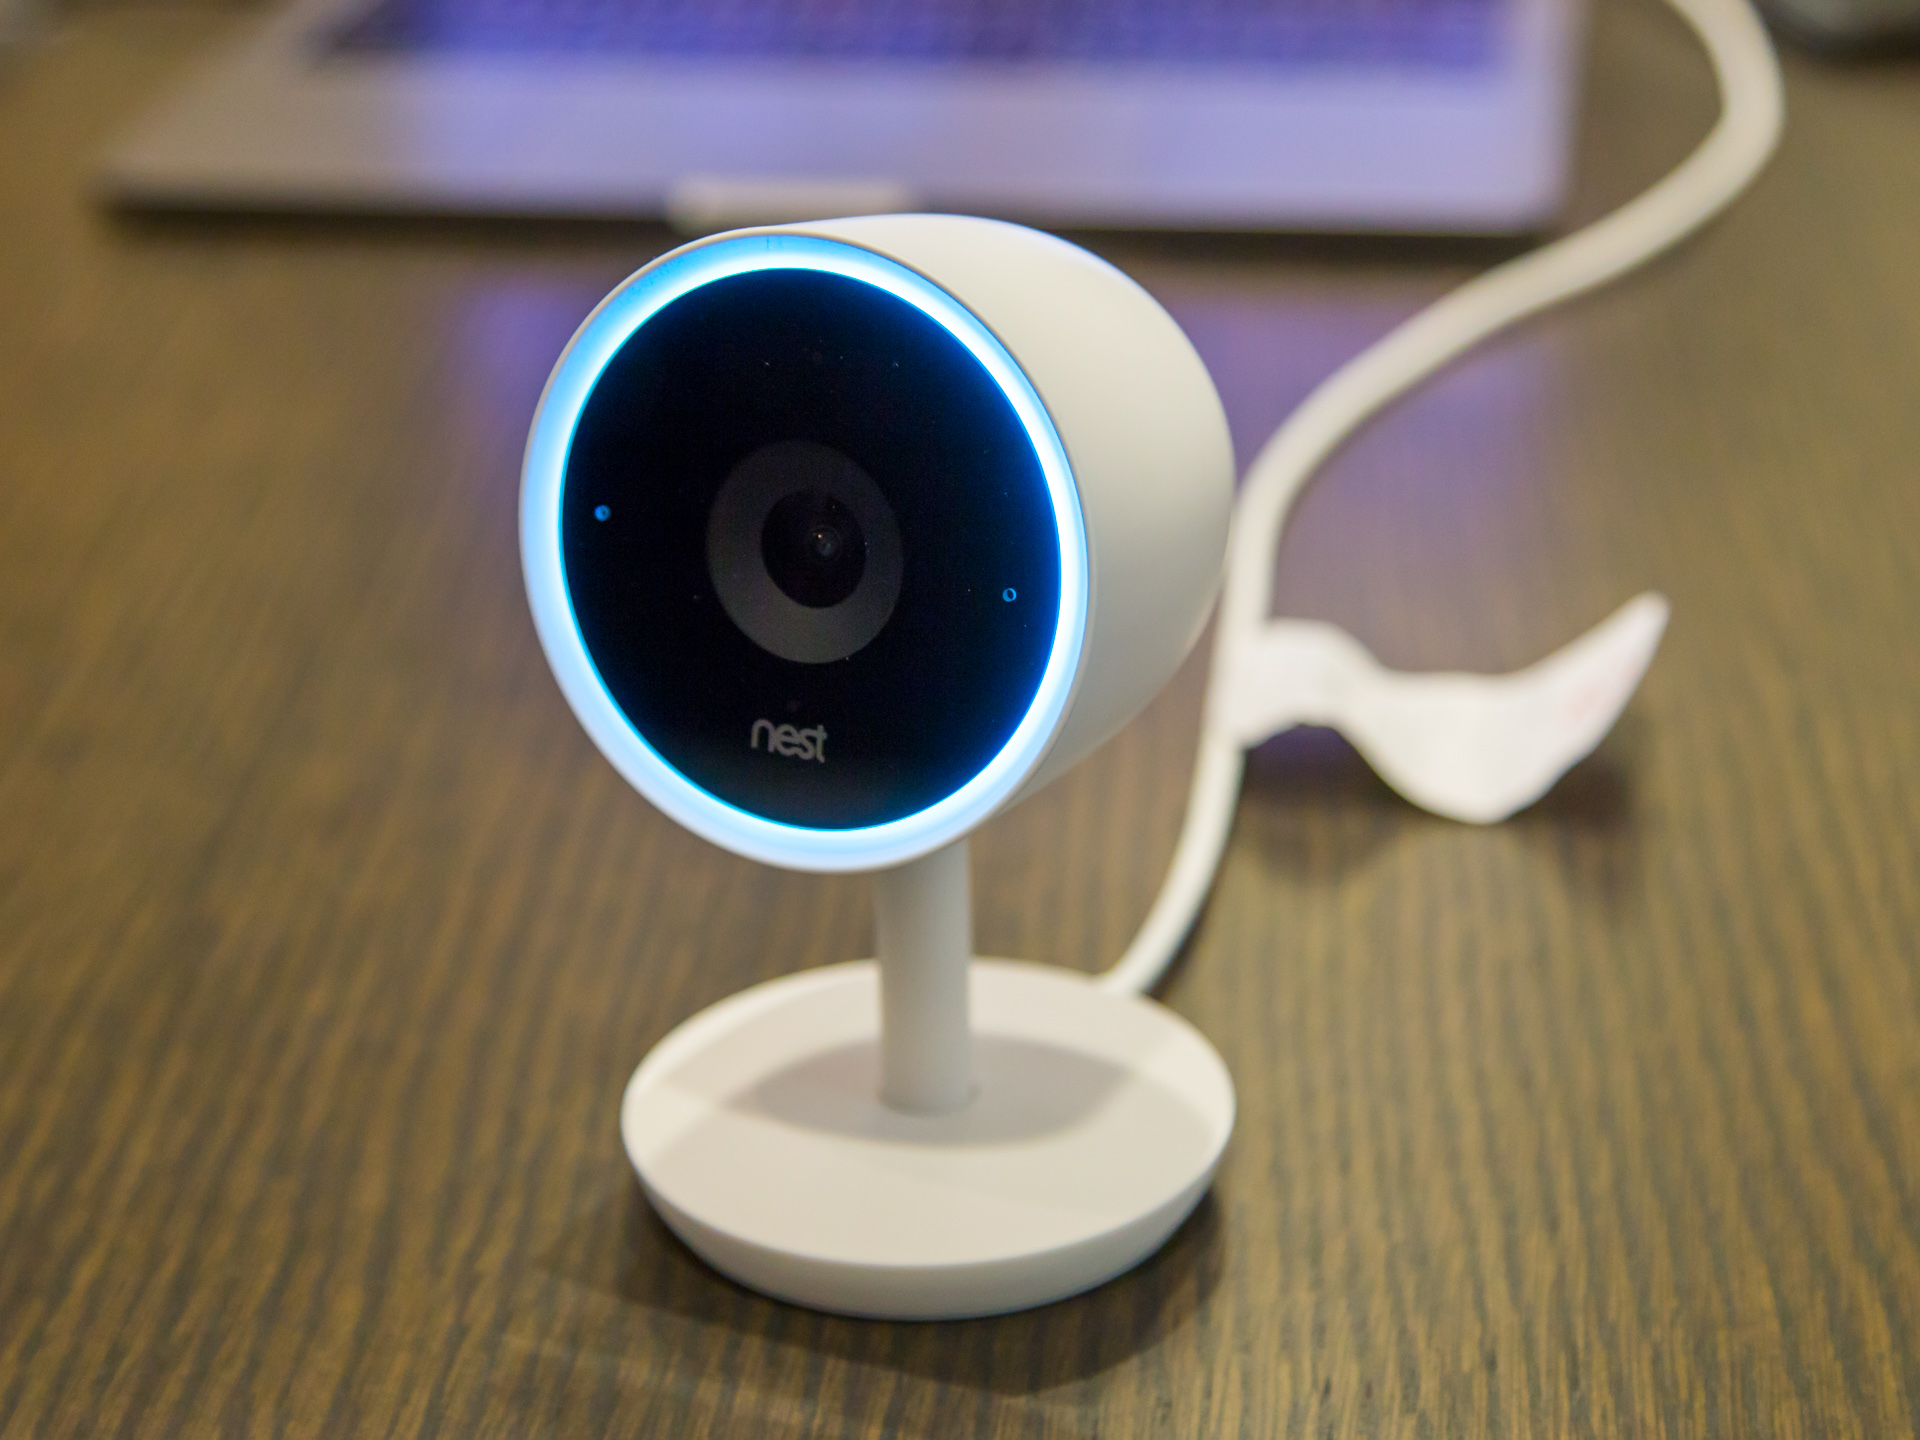 nest-cam-iq-gets-ok-google-support-lower-monthly-fee-ars-technica